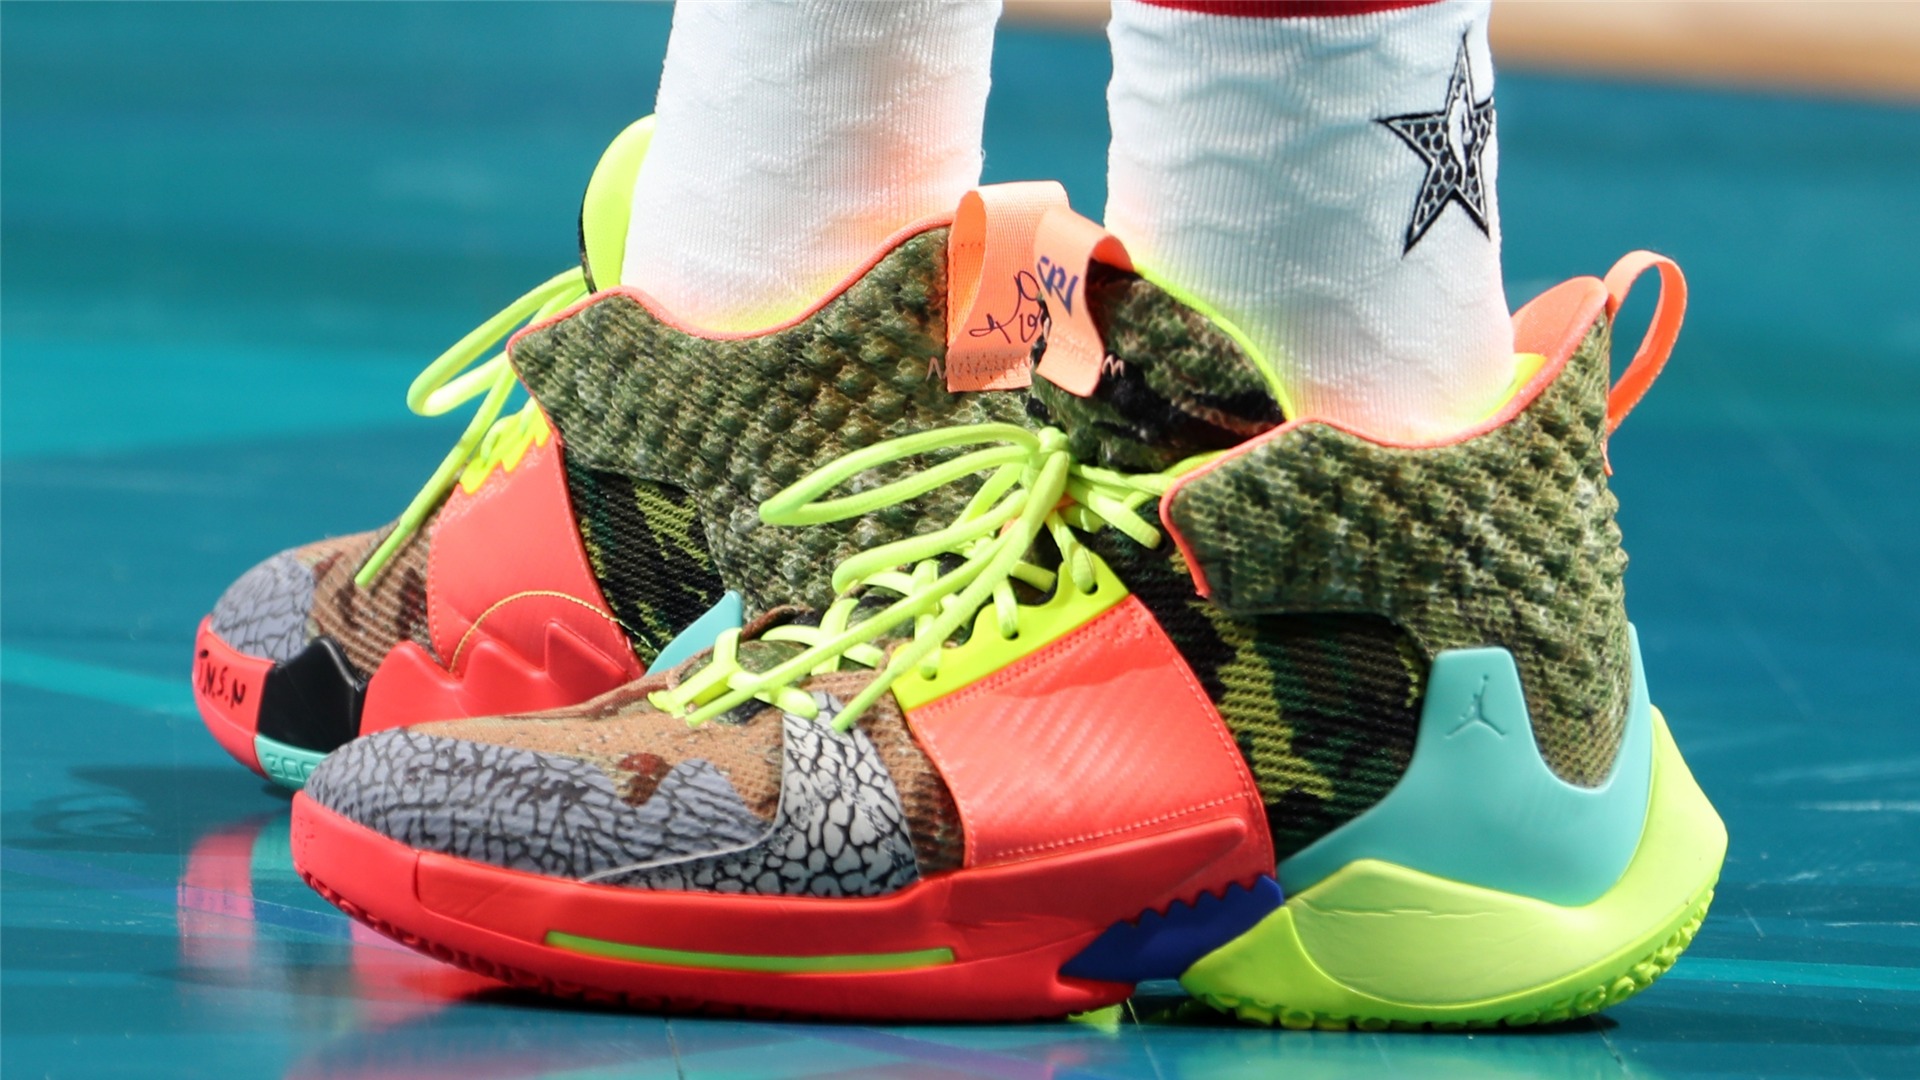 russell westbrook all star shoes 219